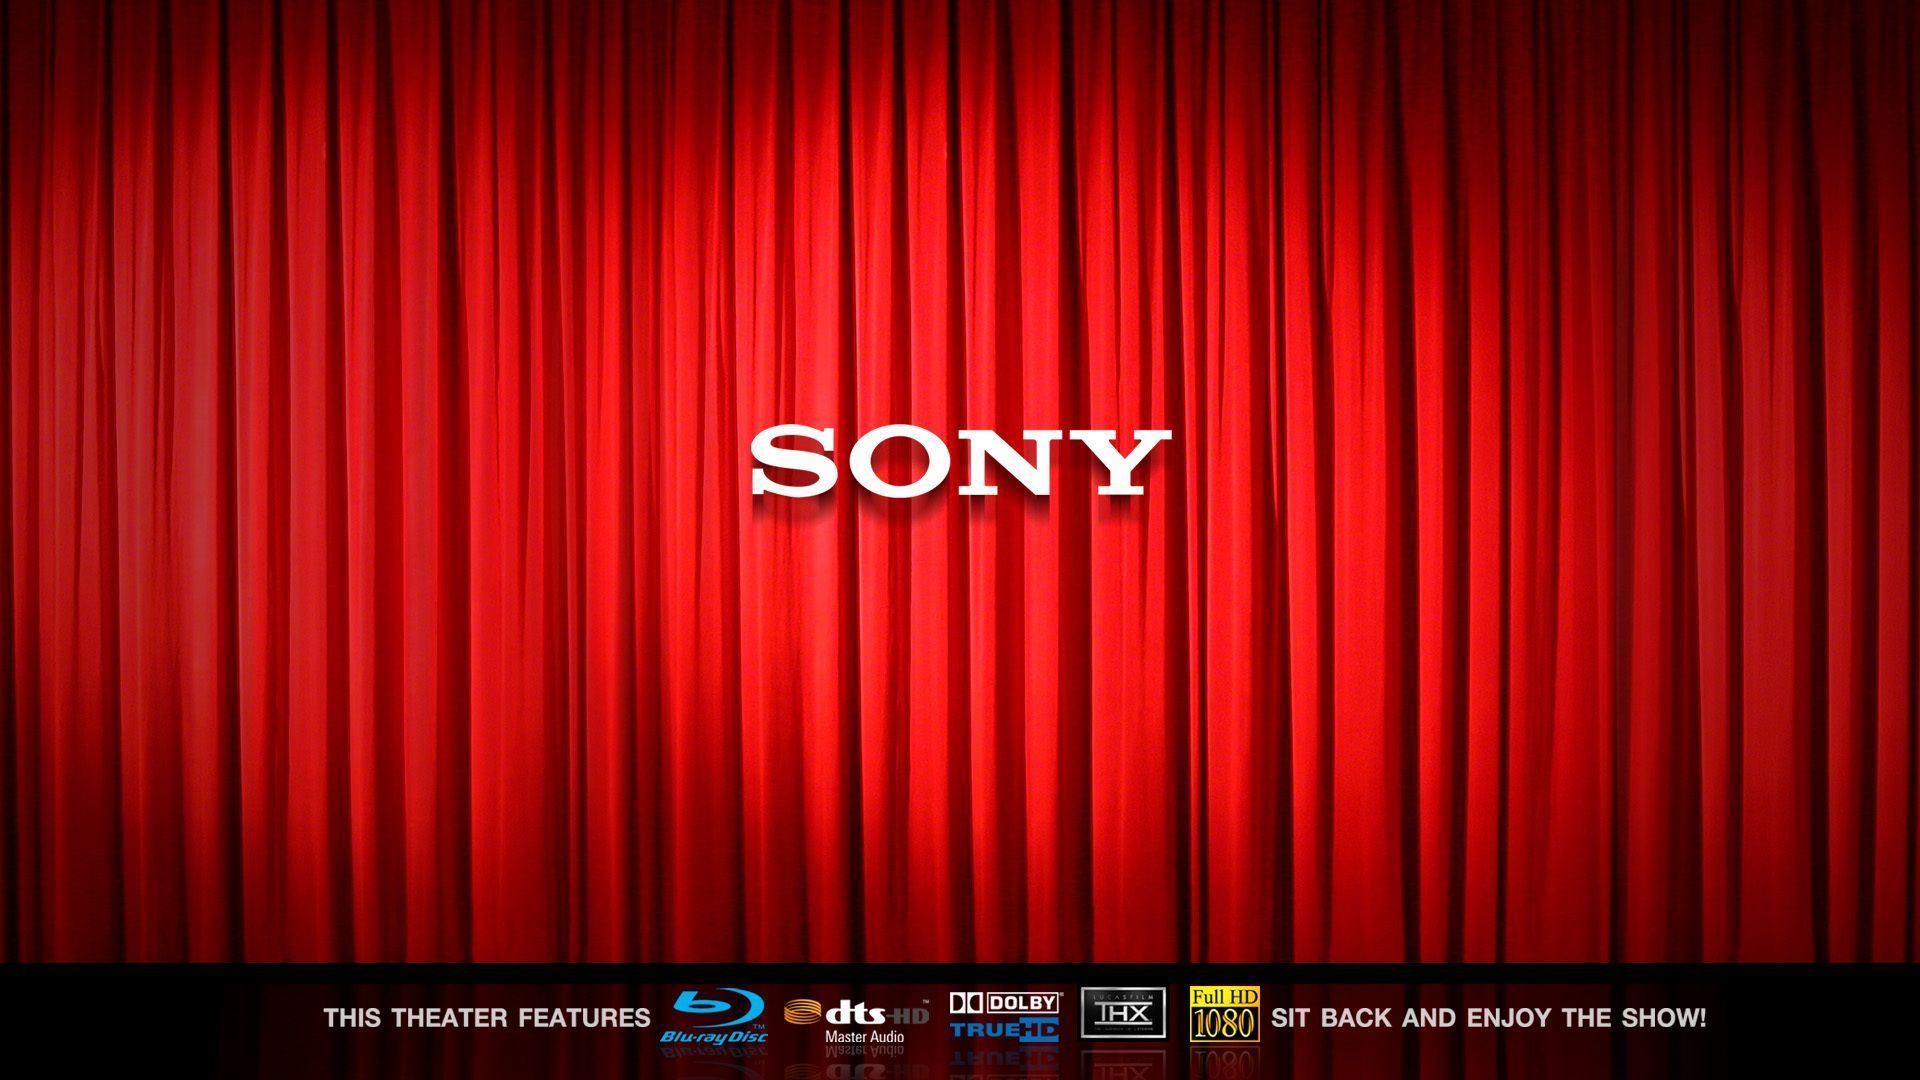 Movies - Generic - Sony Cinema - Home Theater Backdrops & Backgrounds